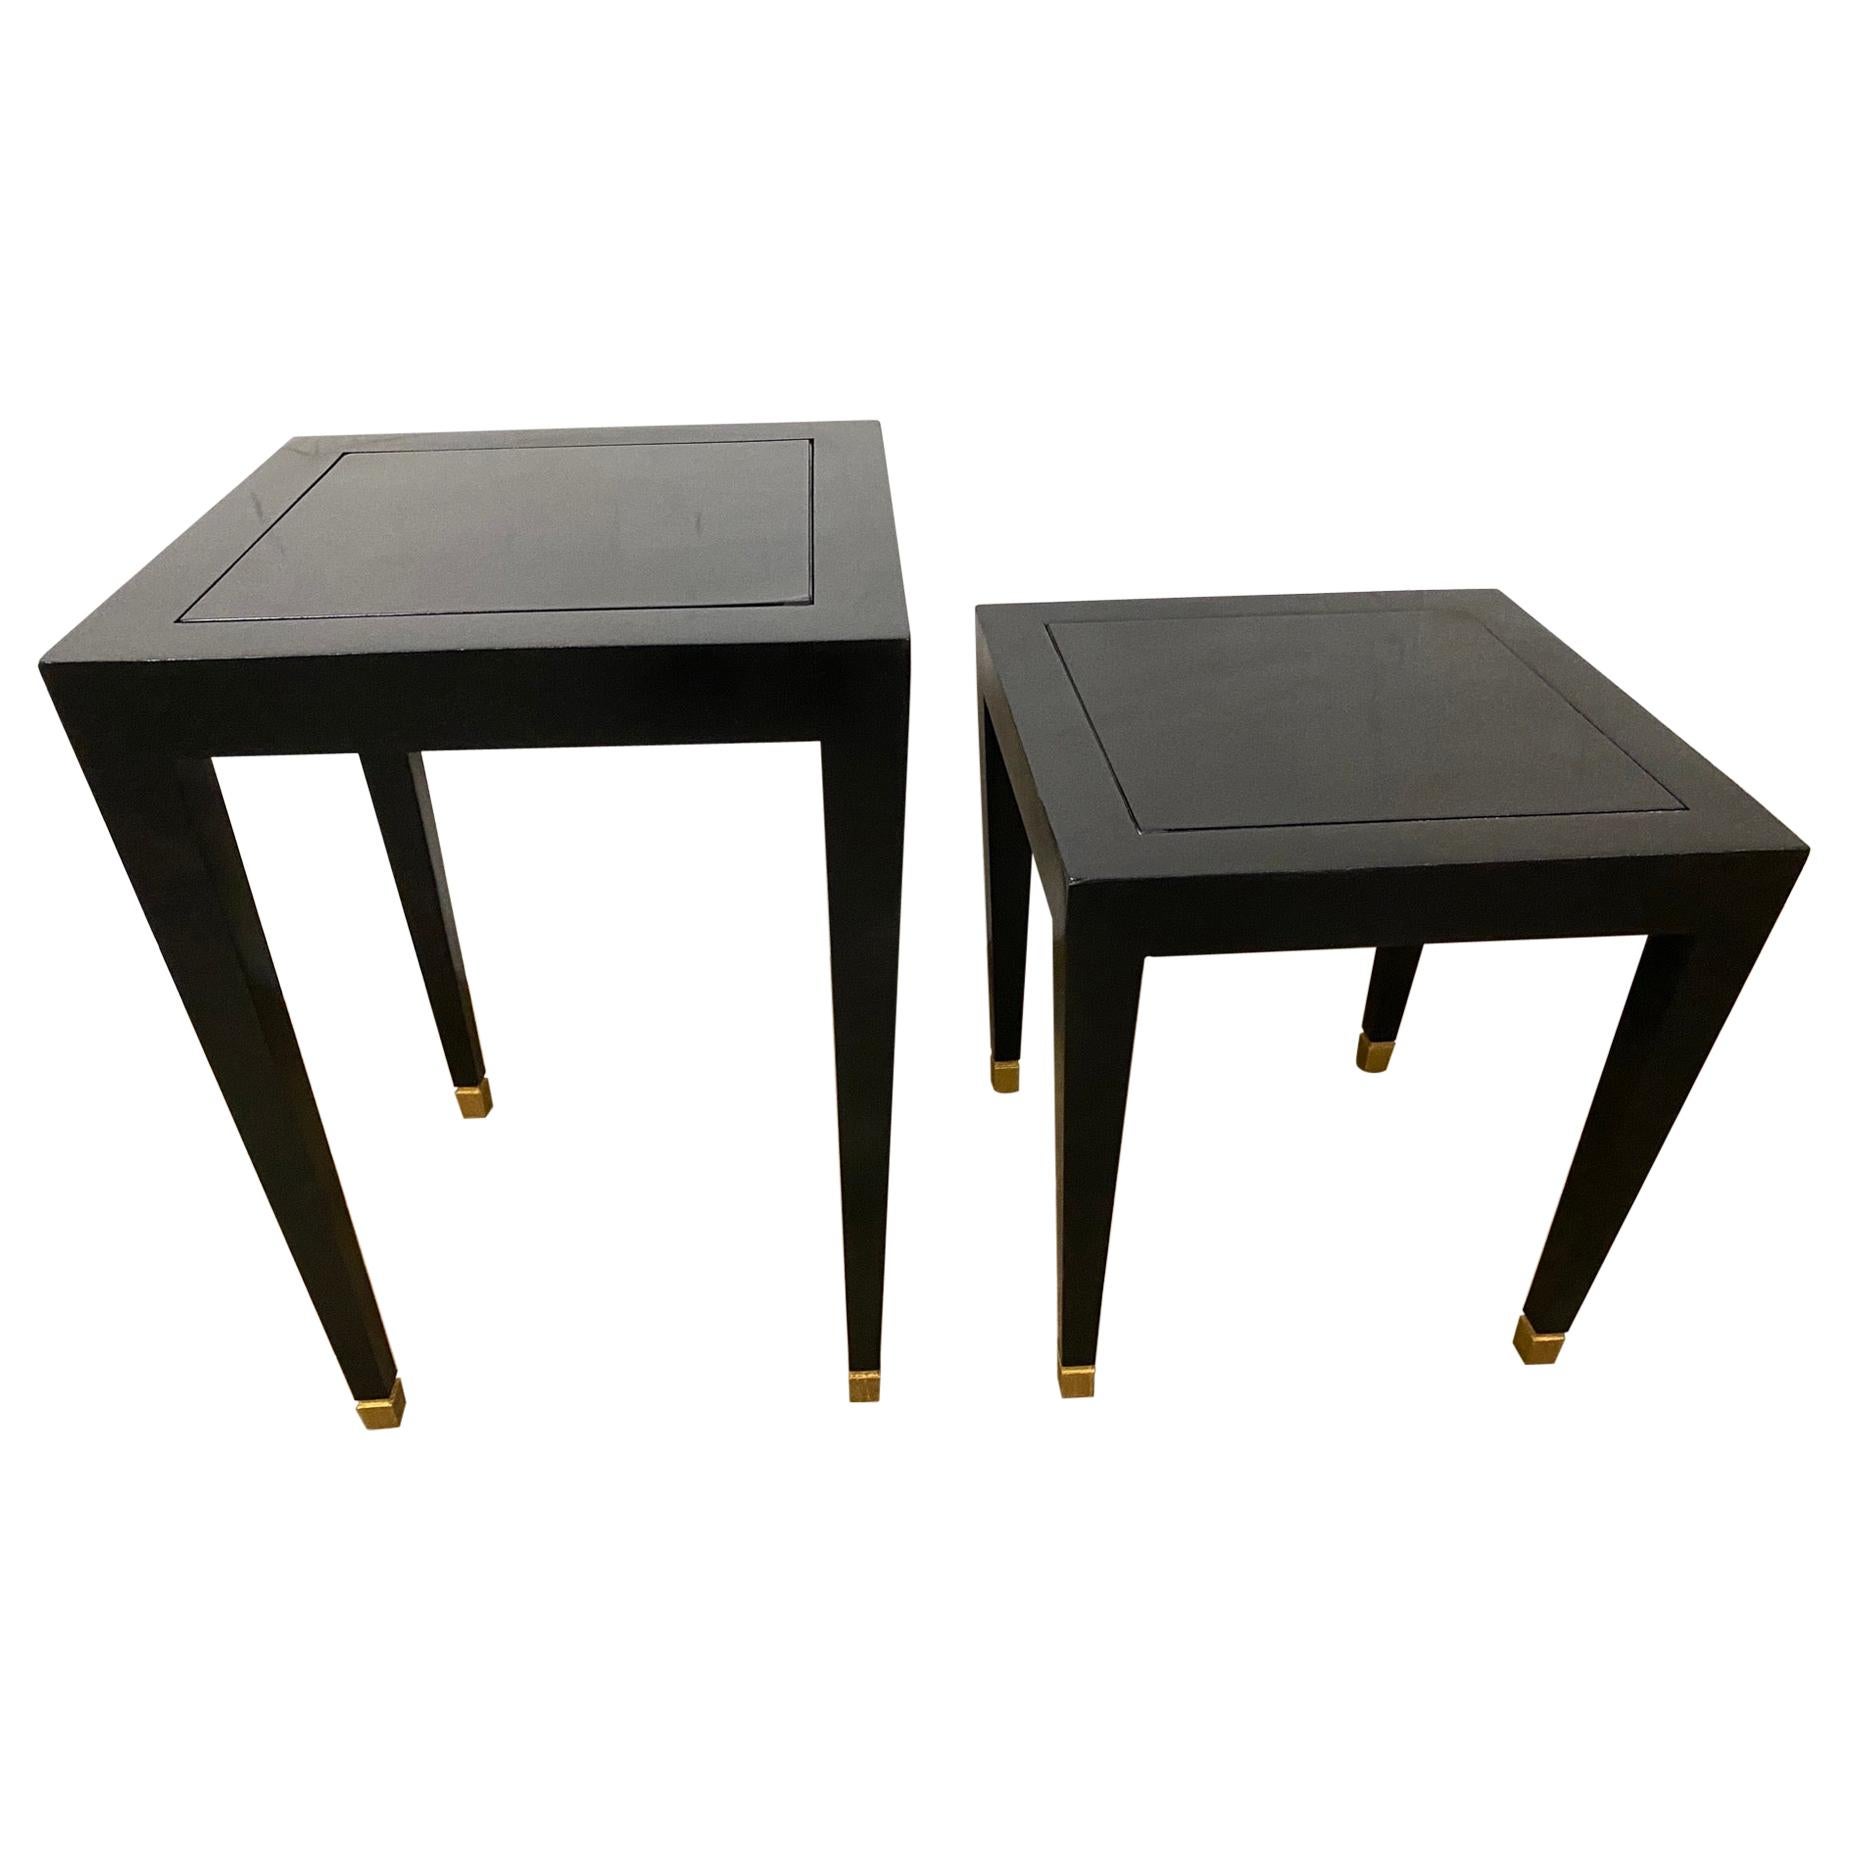 Two Donghia Madrid Square Side Tables